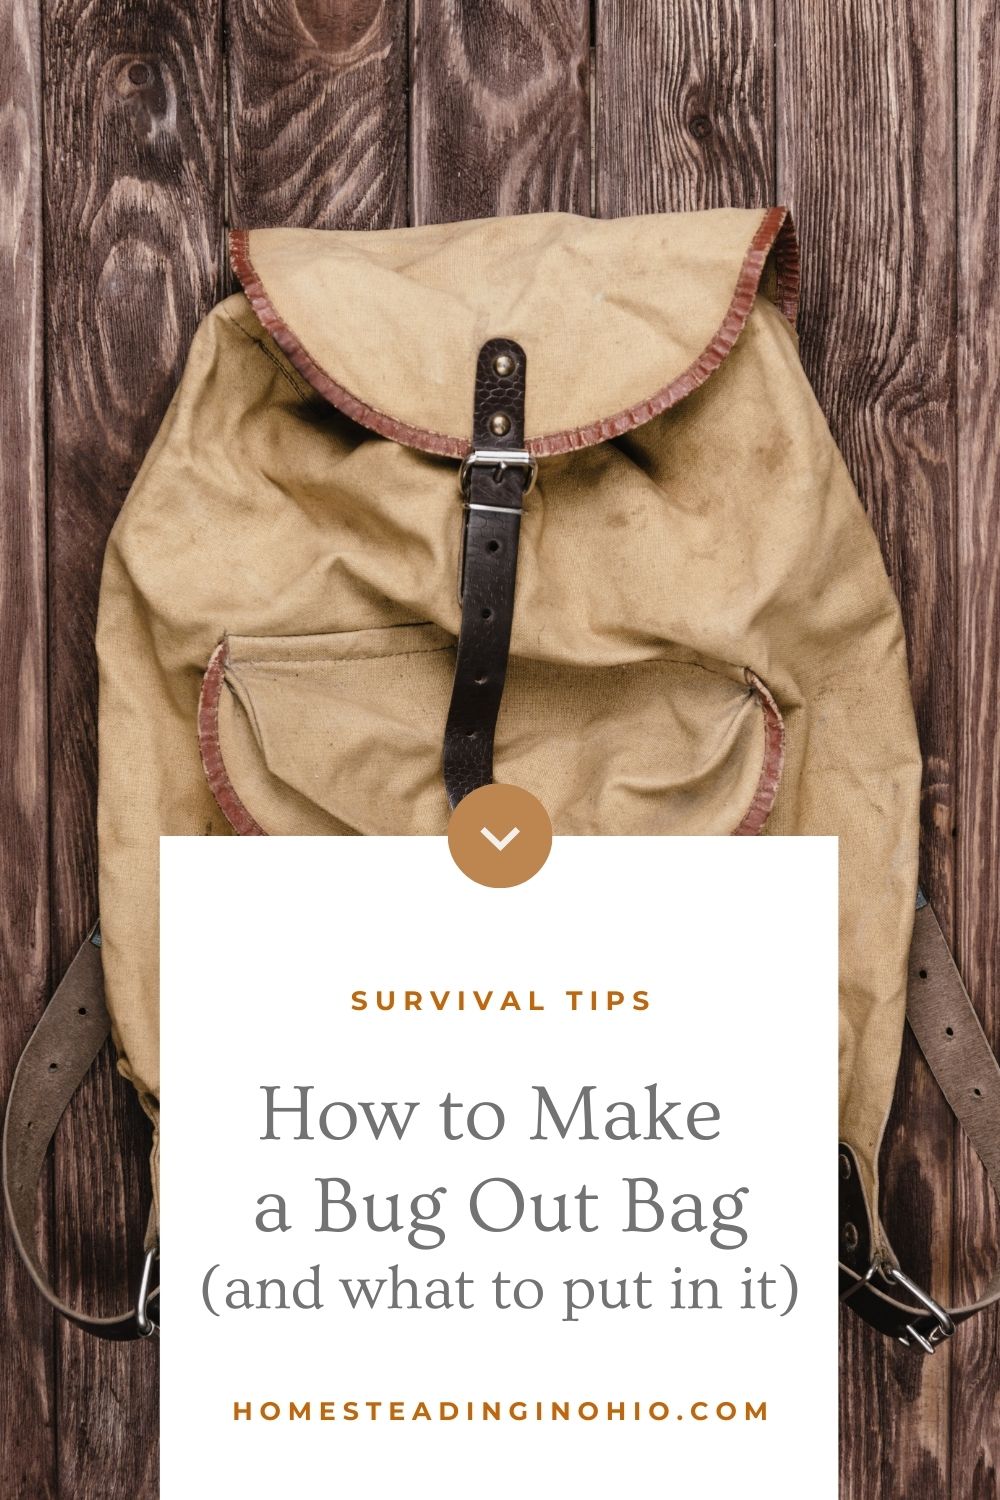 What Should Be in a Bug Out Bag? - Homesteading in Ohio